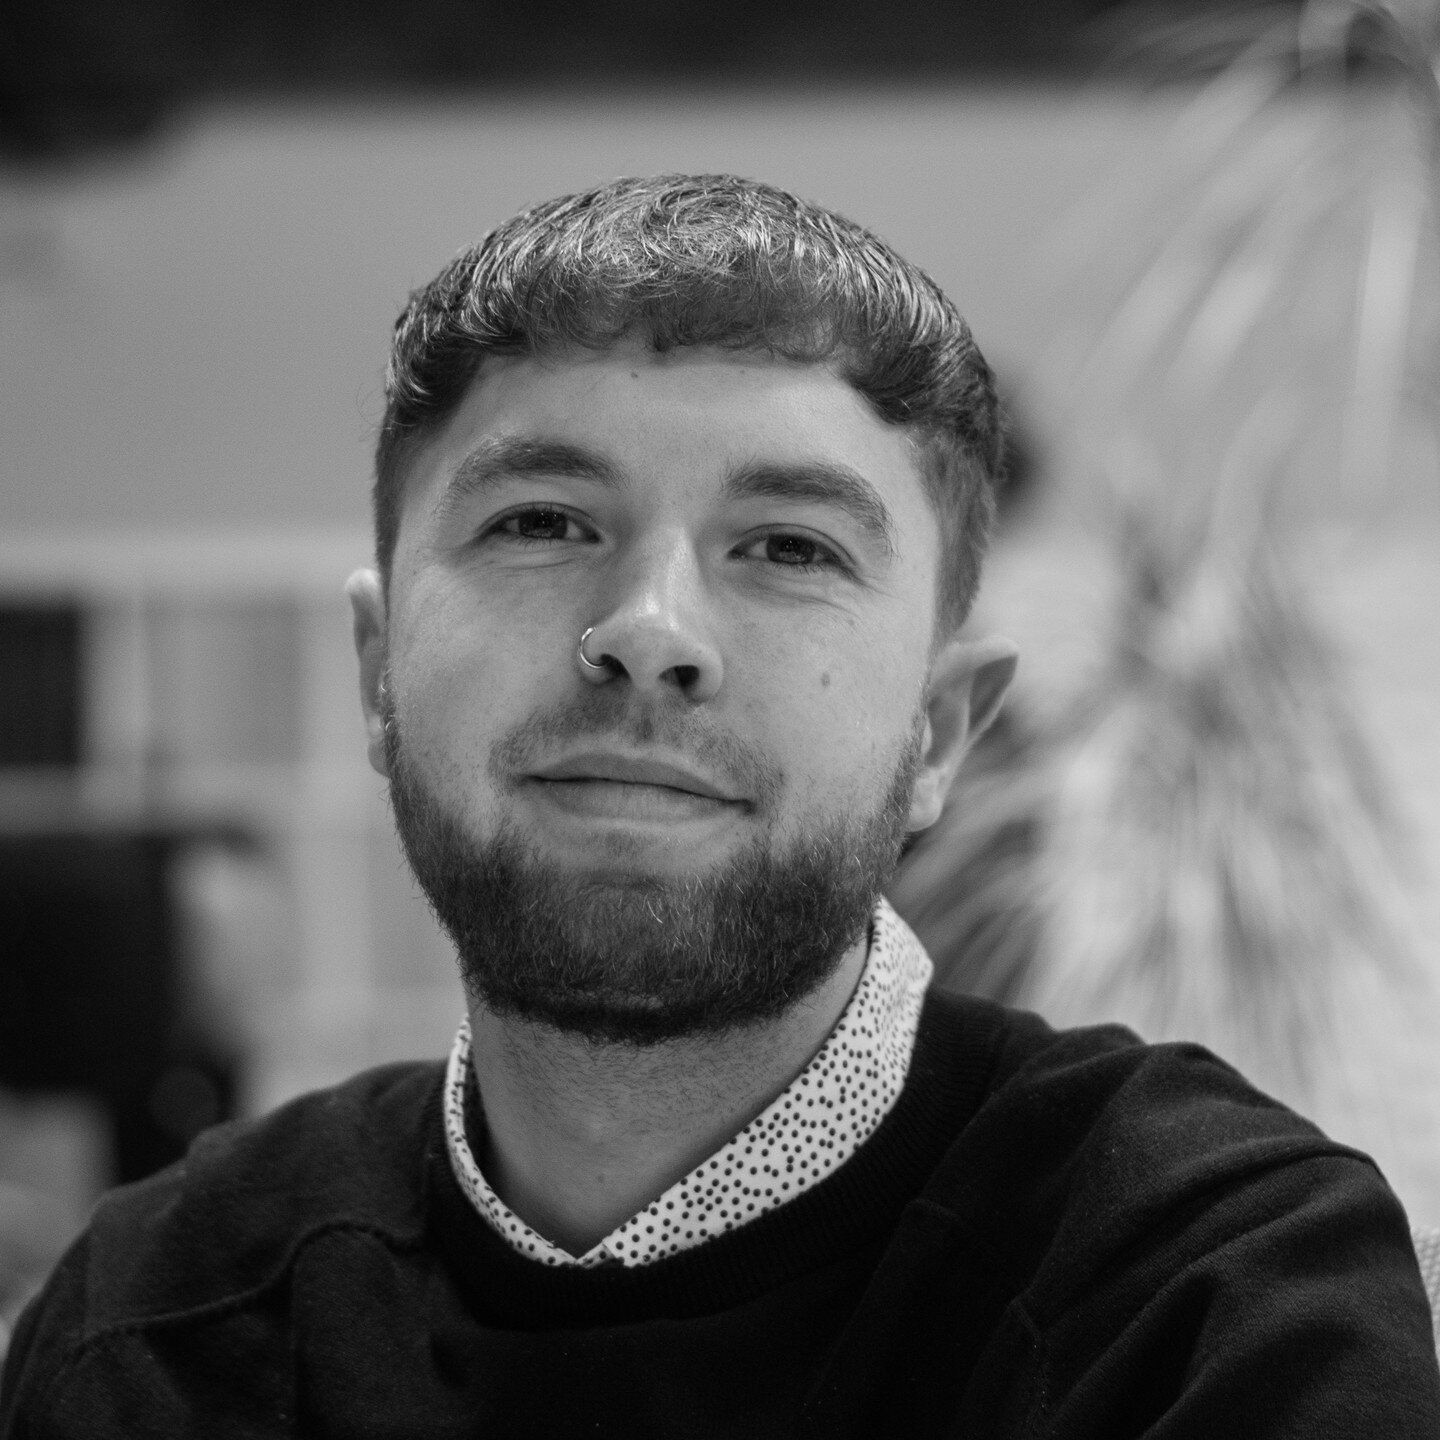 Delighted to announce a new Staniforth Architect team member. Meet Declan - Architectural Technologist. 

Declan has joined our studio after graduating with a First-Class Honours in Architectural Design and Technology BA (Hons) and a distinction in S